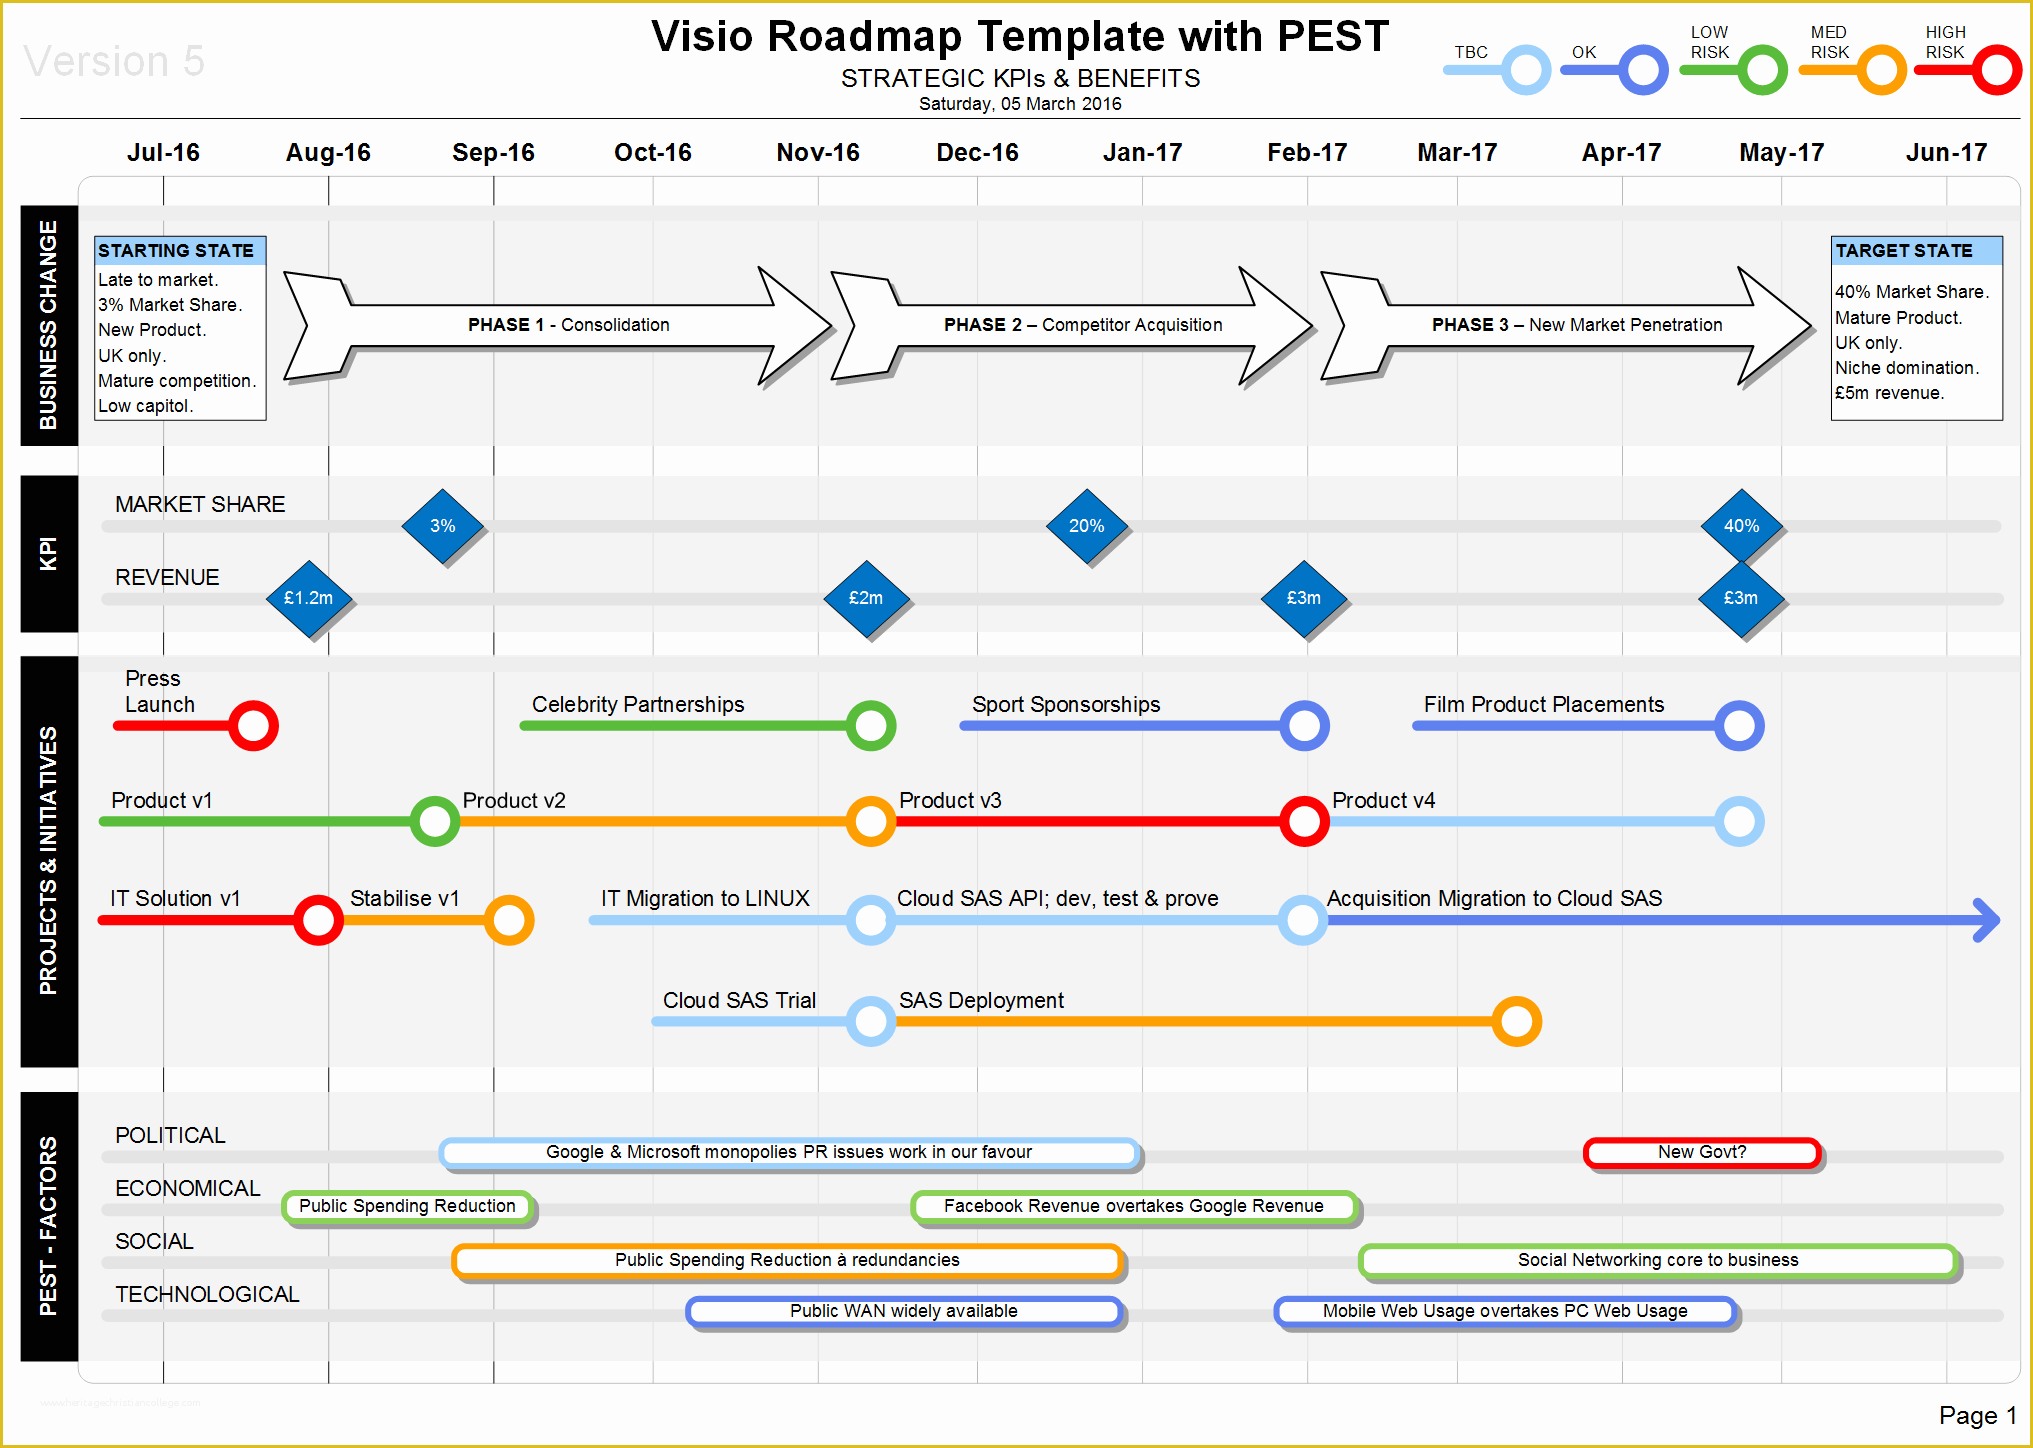 Free Marketing Roadmap Template Of Roadmap with Pest Strategic Insights On Your Roadmaps